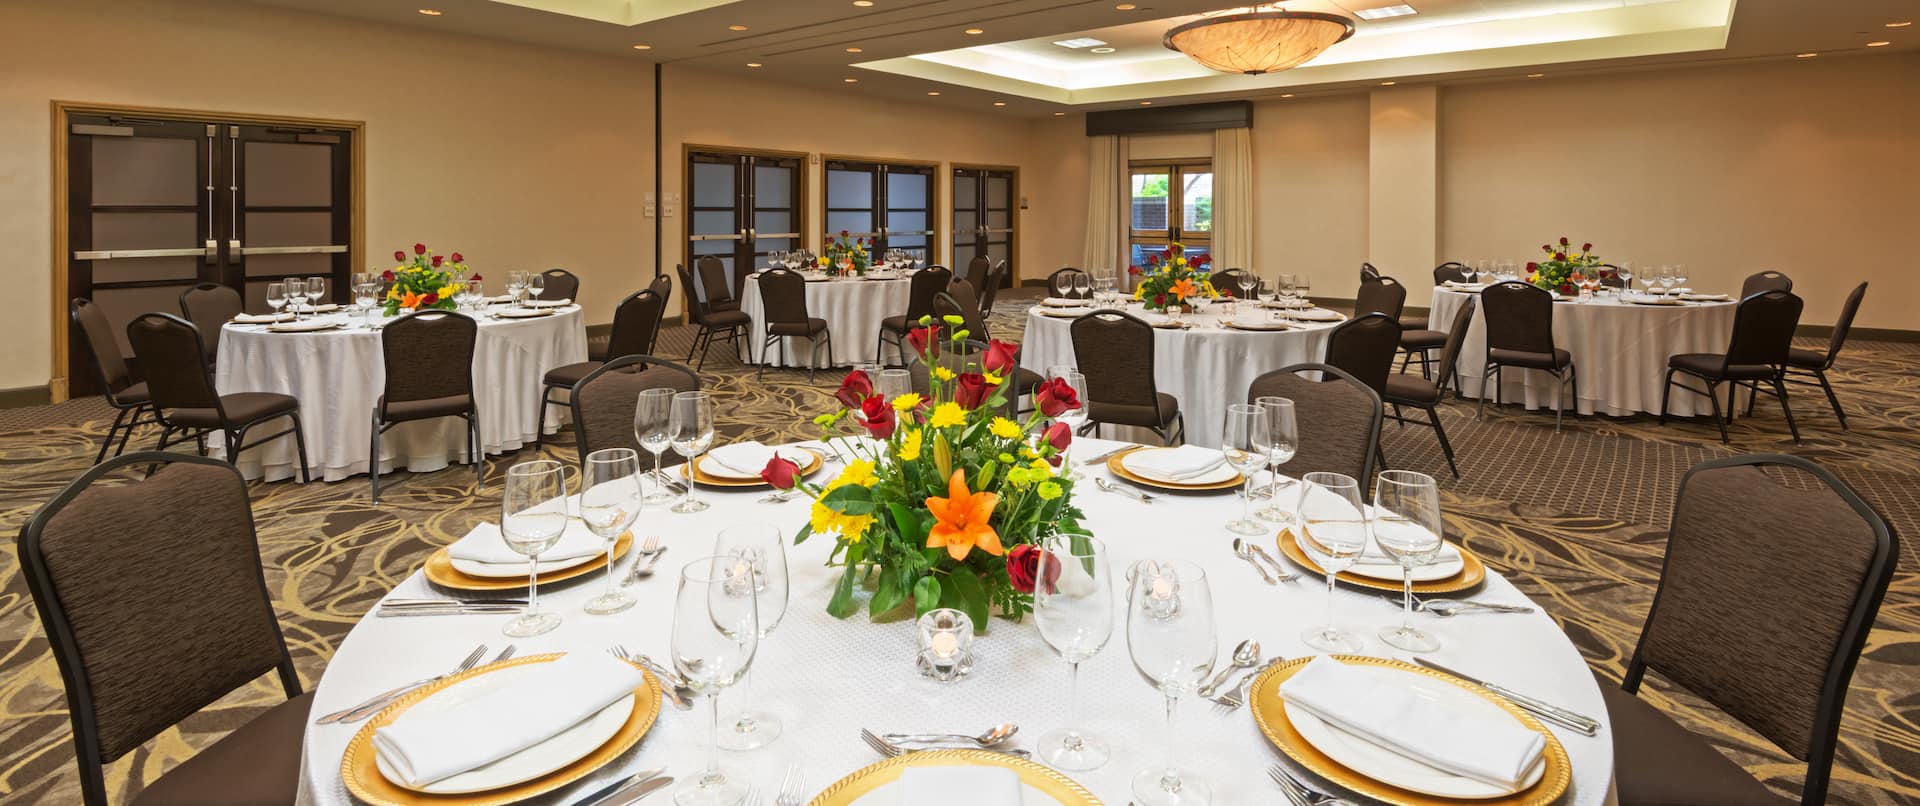 Round Tables in Ballroom With Place Settings, Flowers and Candles on White Tablecloths